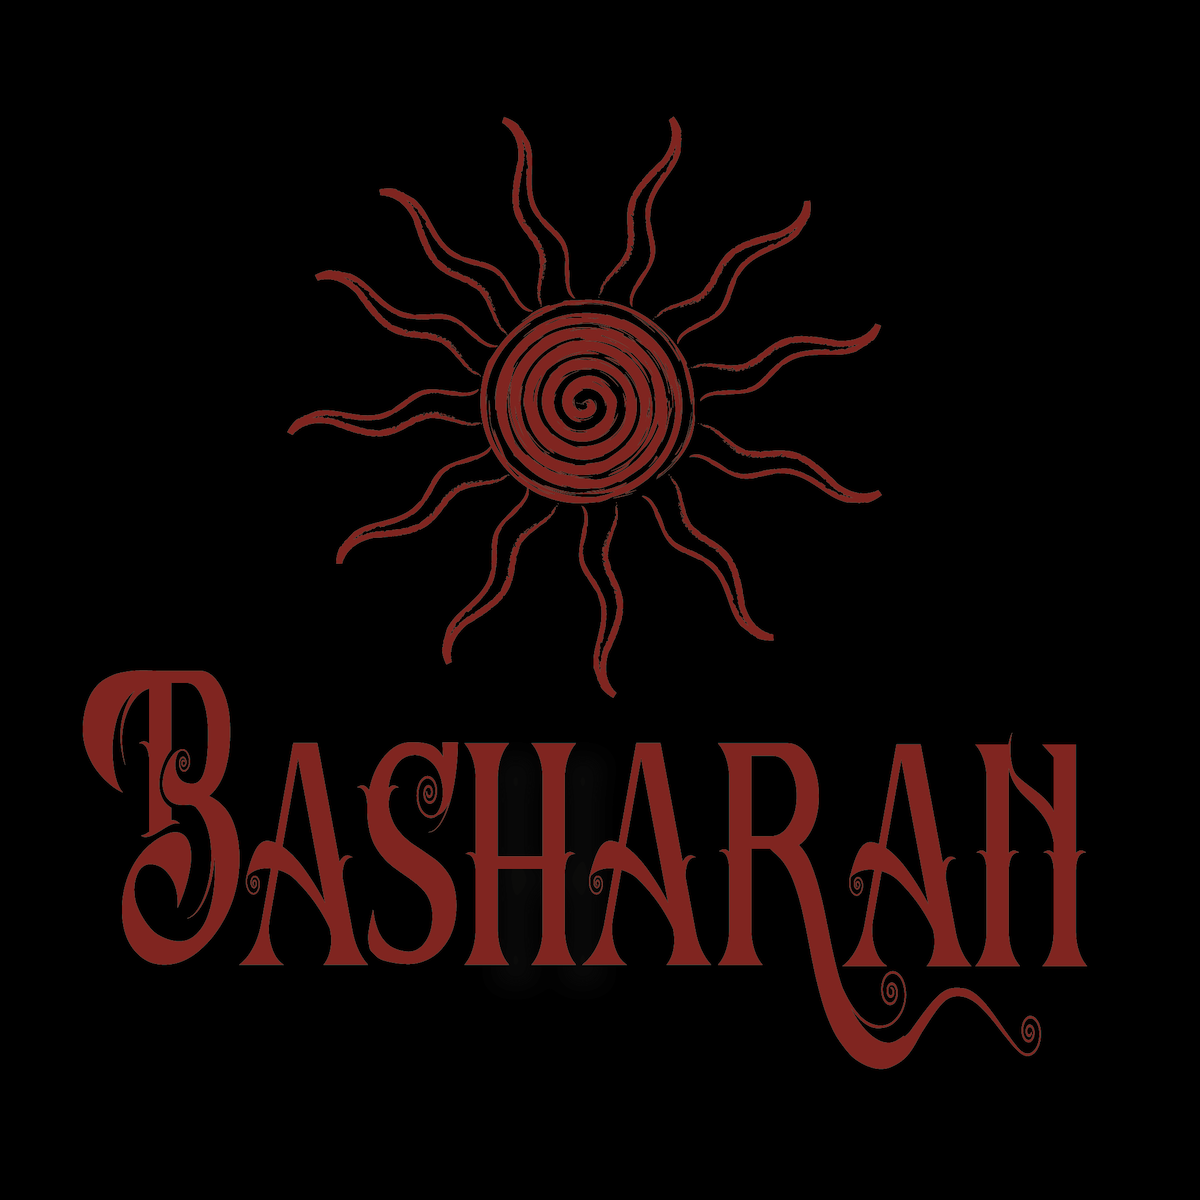 LISTEN: “Orchid” by Basharan